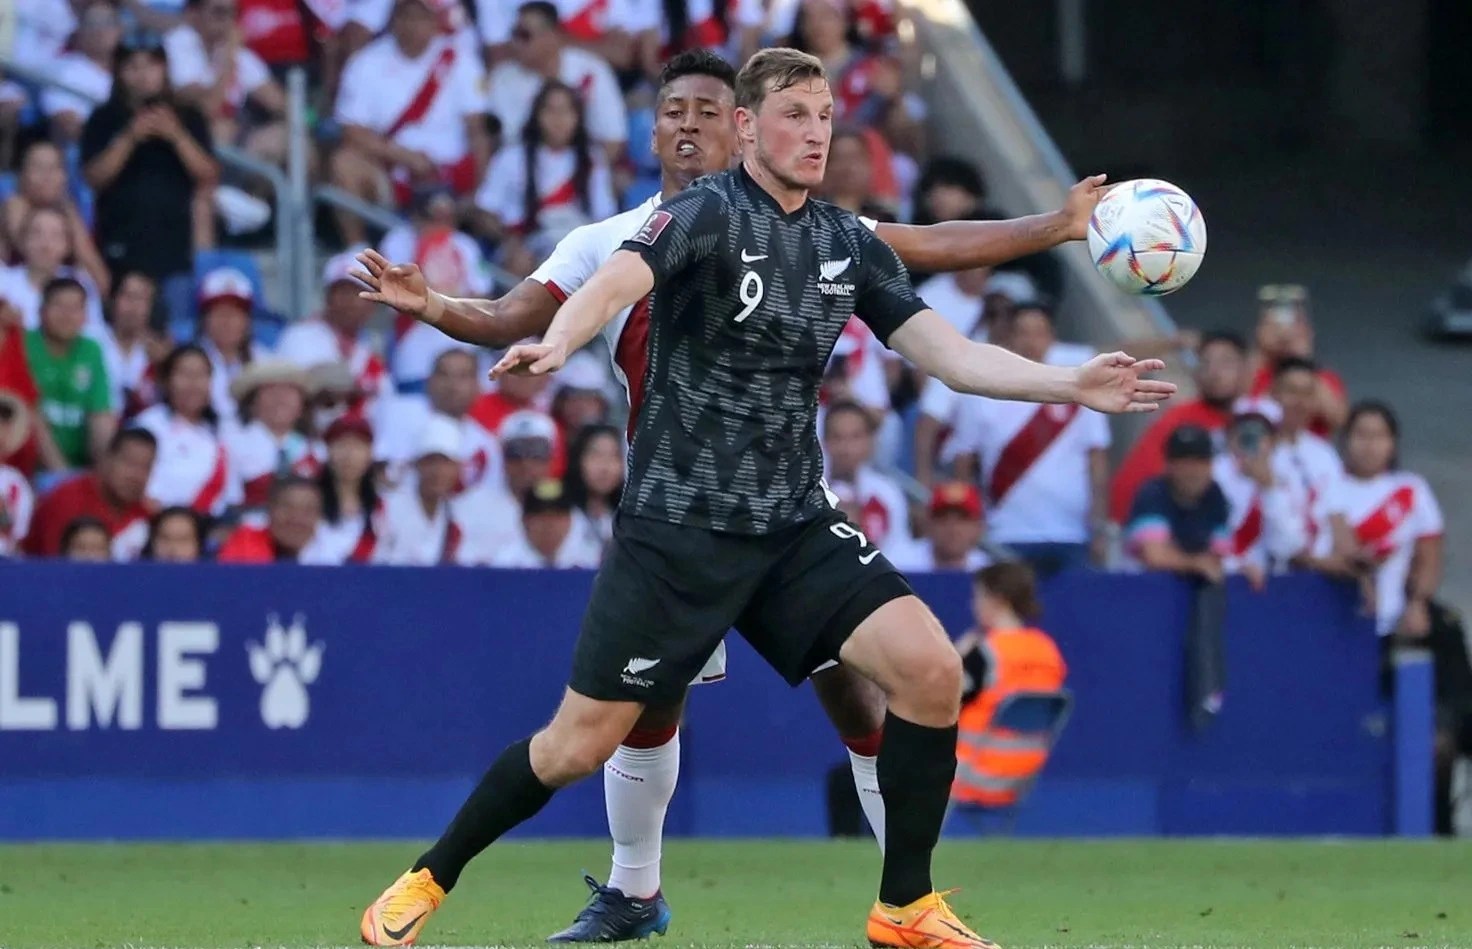 World Cup Inter-Continental Playoff 2022: Costa Rica and New Zealand go head-to-head for a place in the World Cup 2022 Qatar, Follow Costa Rica vs New Zealand LIVE Streaming: Check Team News, Live Streaming